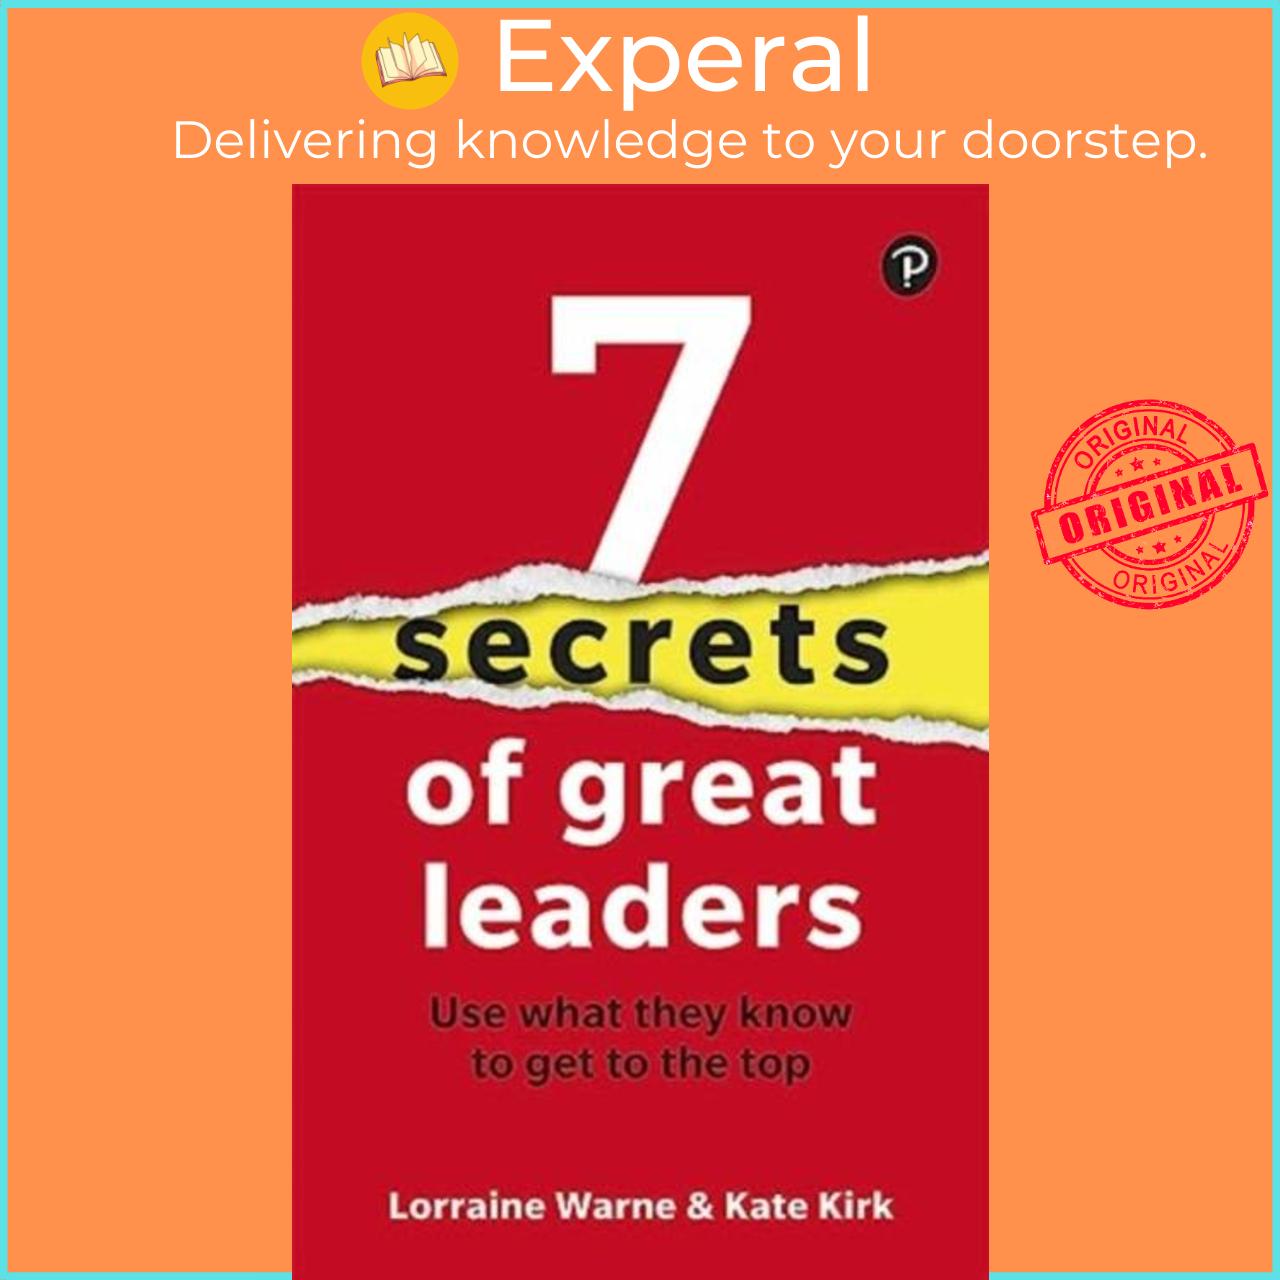 Sách - 7 Secrets of Great Leaders: Use what they know to get to the top by Lorraine Warne (UK edition, paperback)